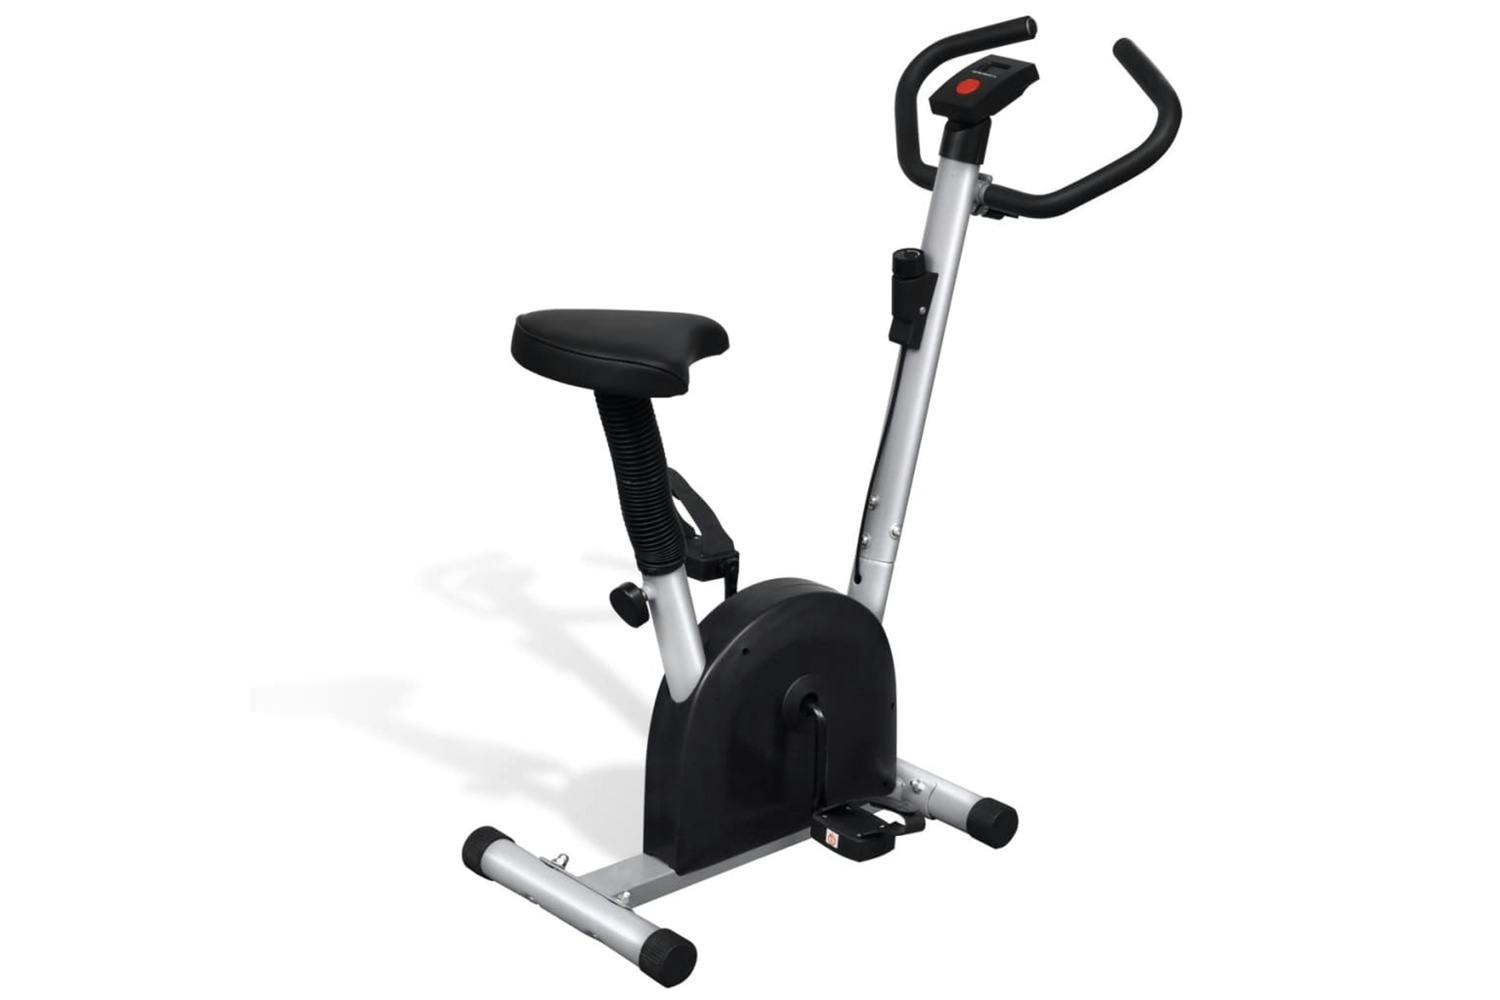 Vidaxl 90639 Fitness Exercise Bike With Seat